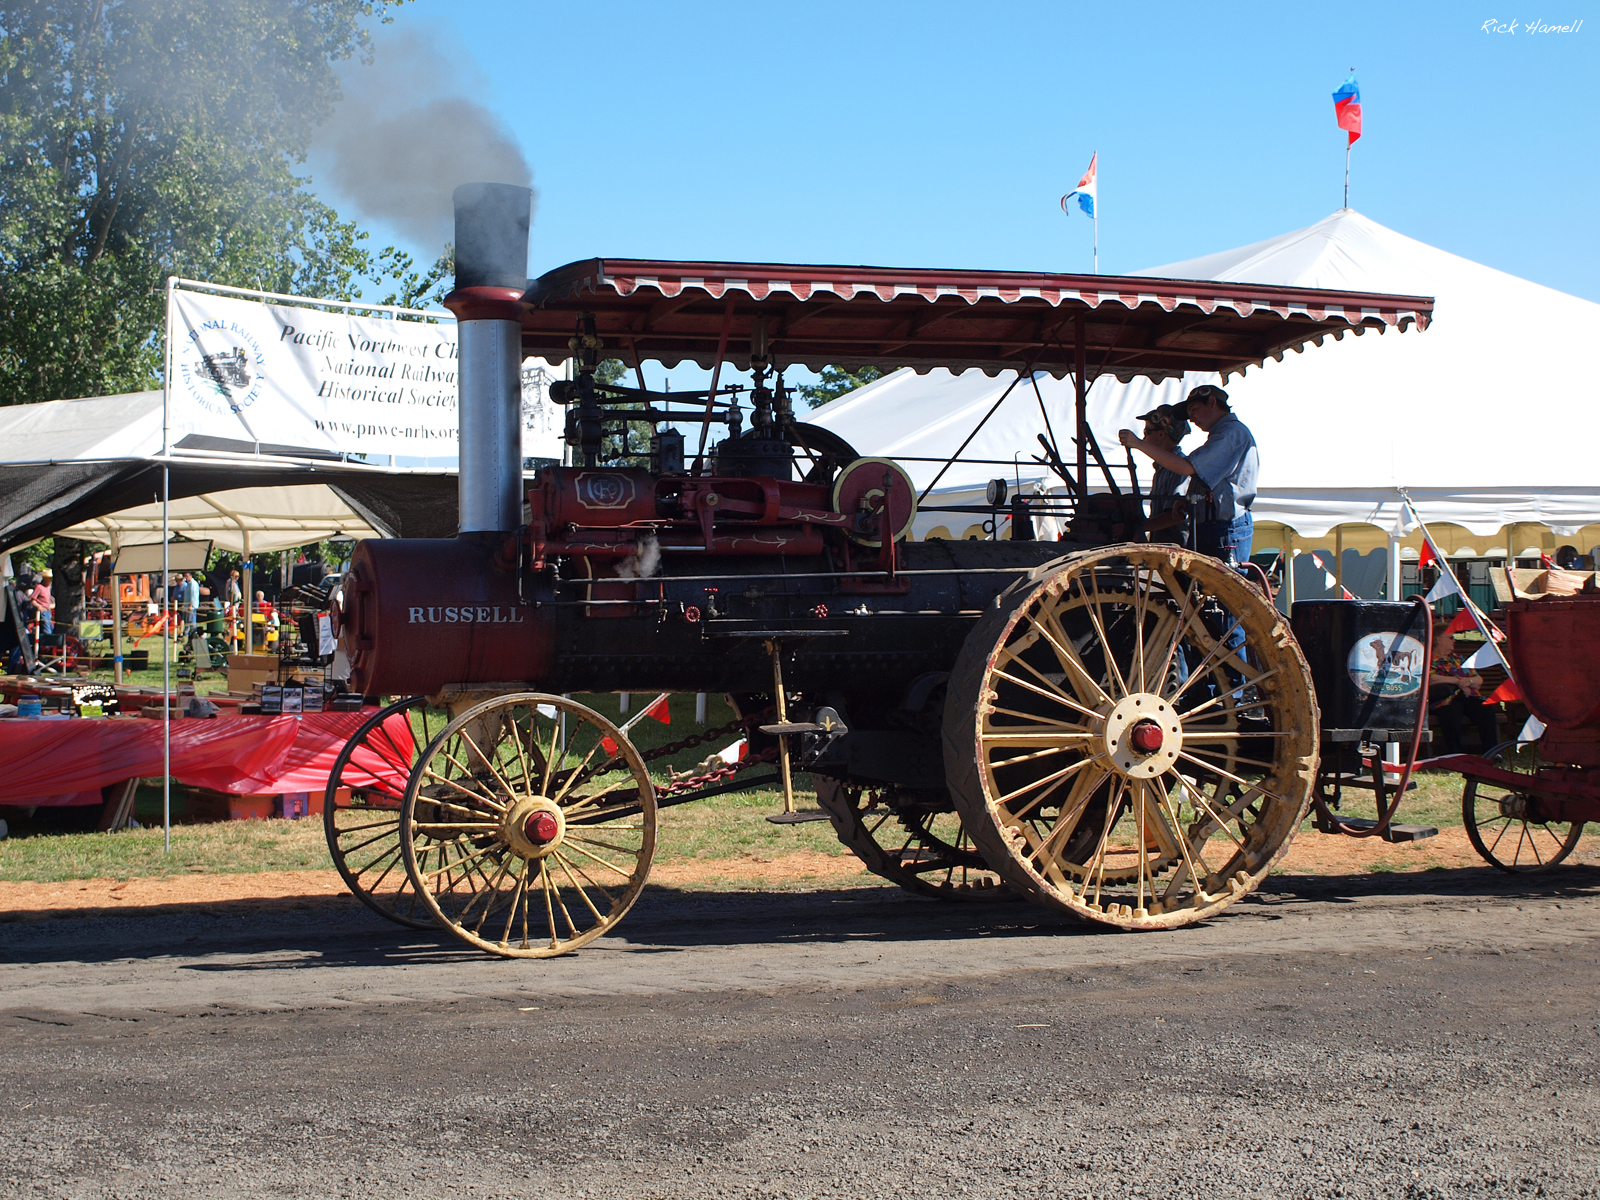 Russell Steam Tractor #23